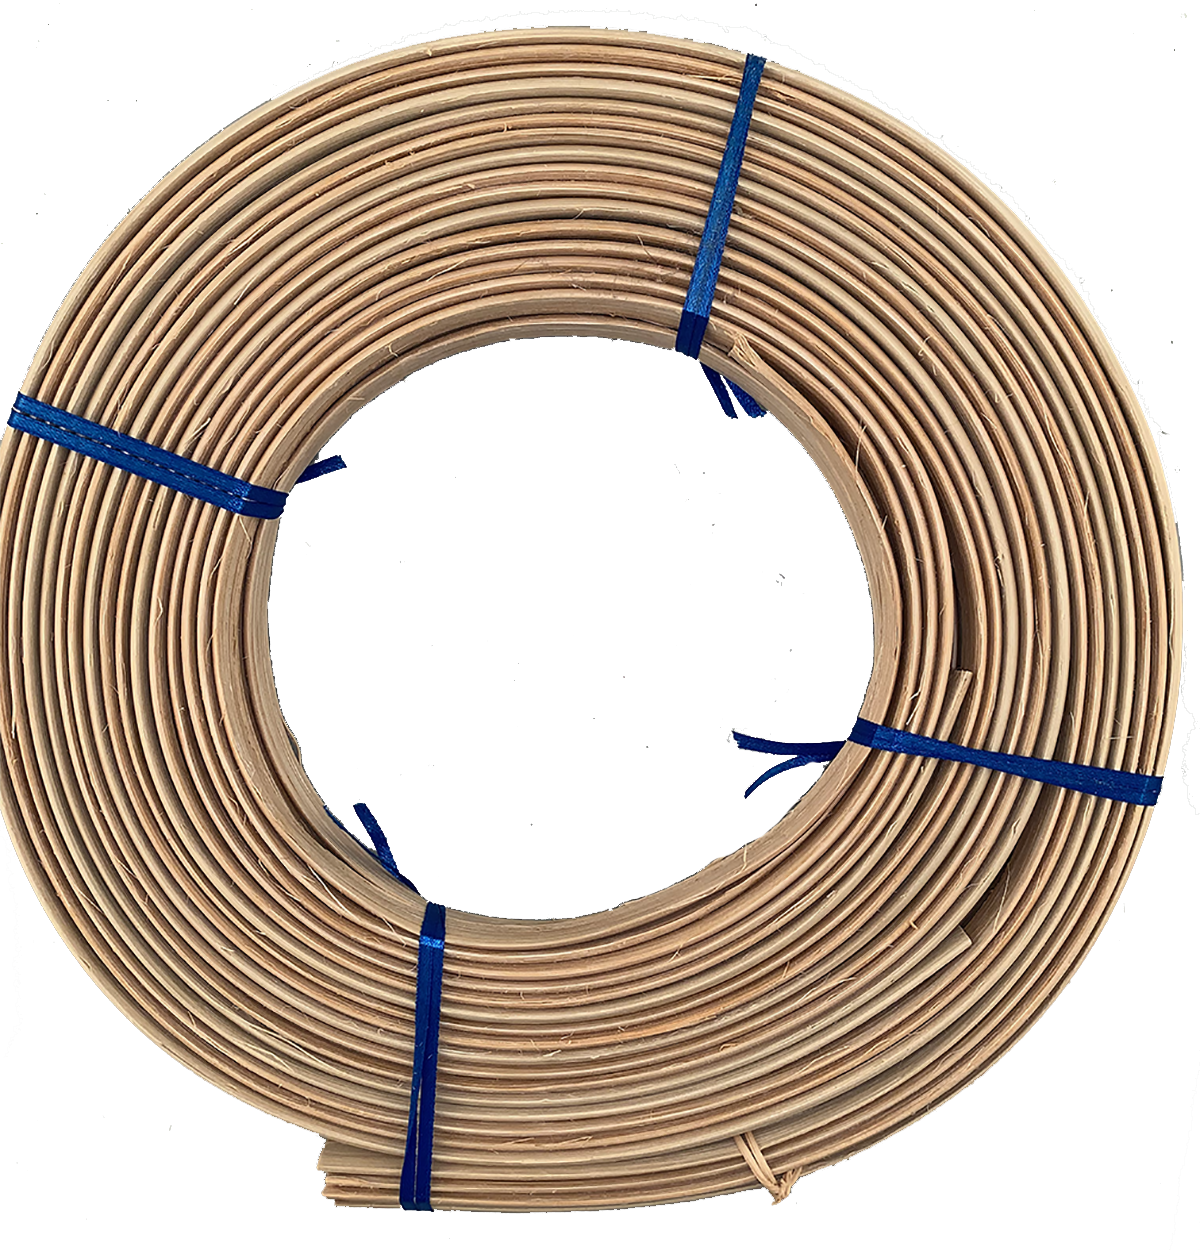 1/2 flat oval reed - 86 ft.